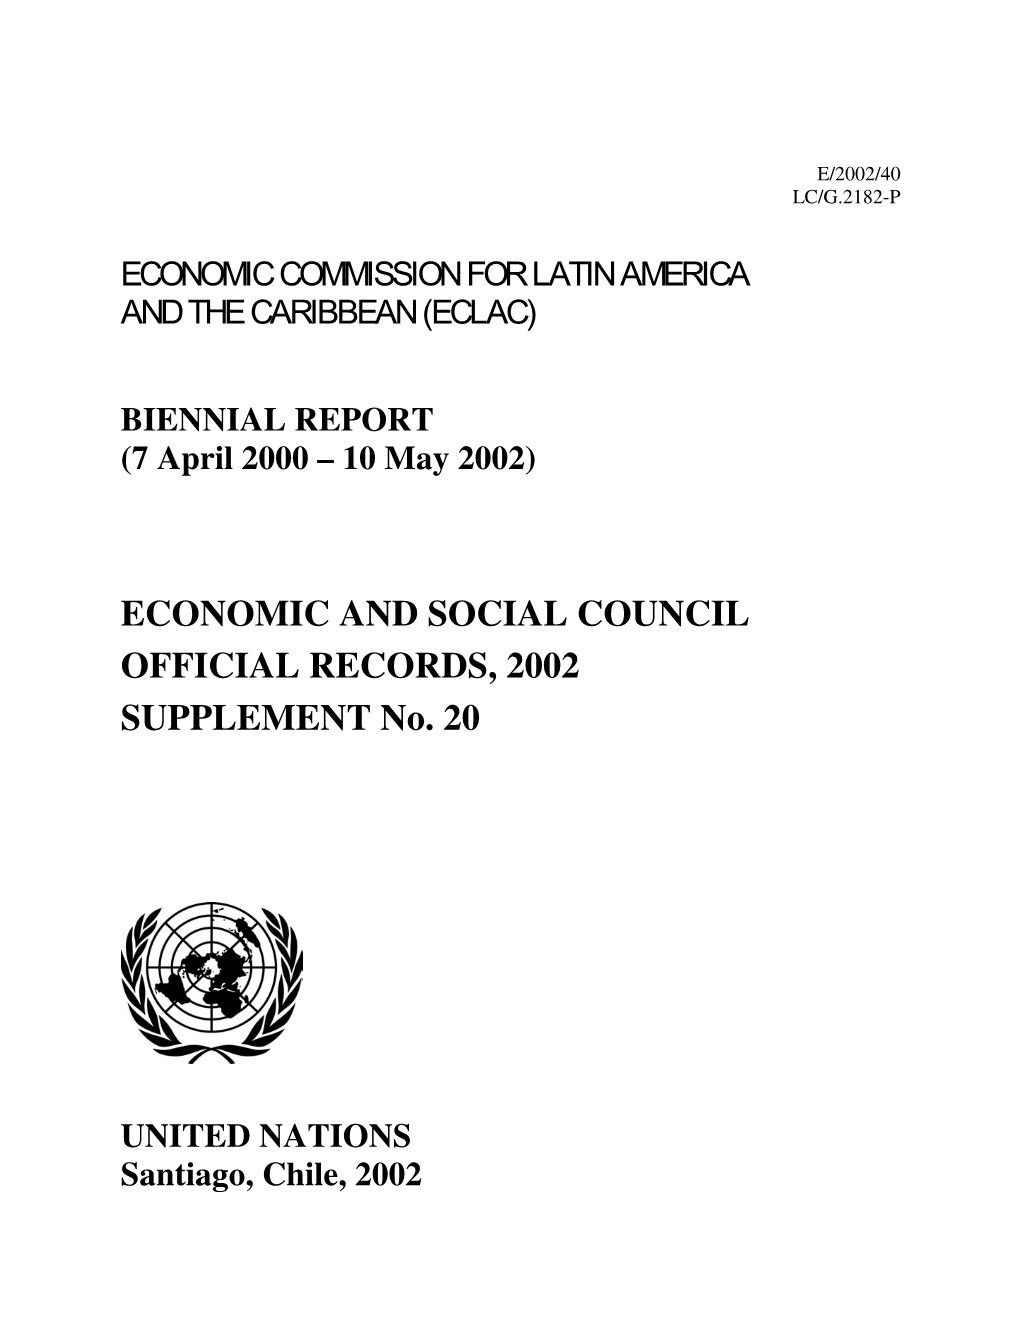 ECONOMIC and SOCIAL COUNCIL OFFICIAL RECORDS, 2002 SUPPLEMENT No